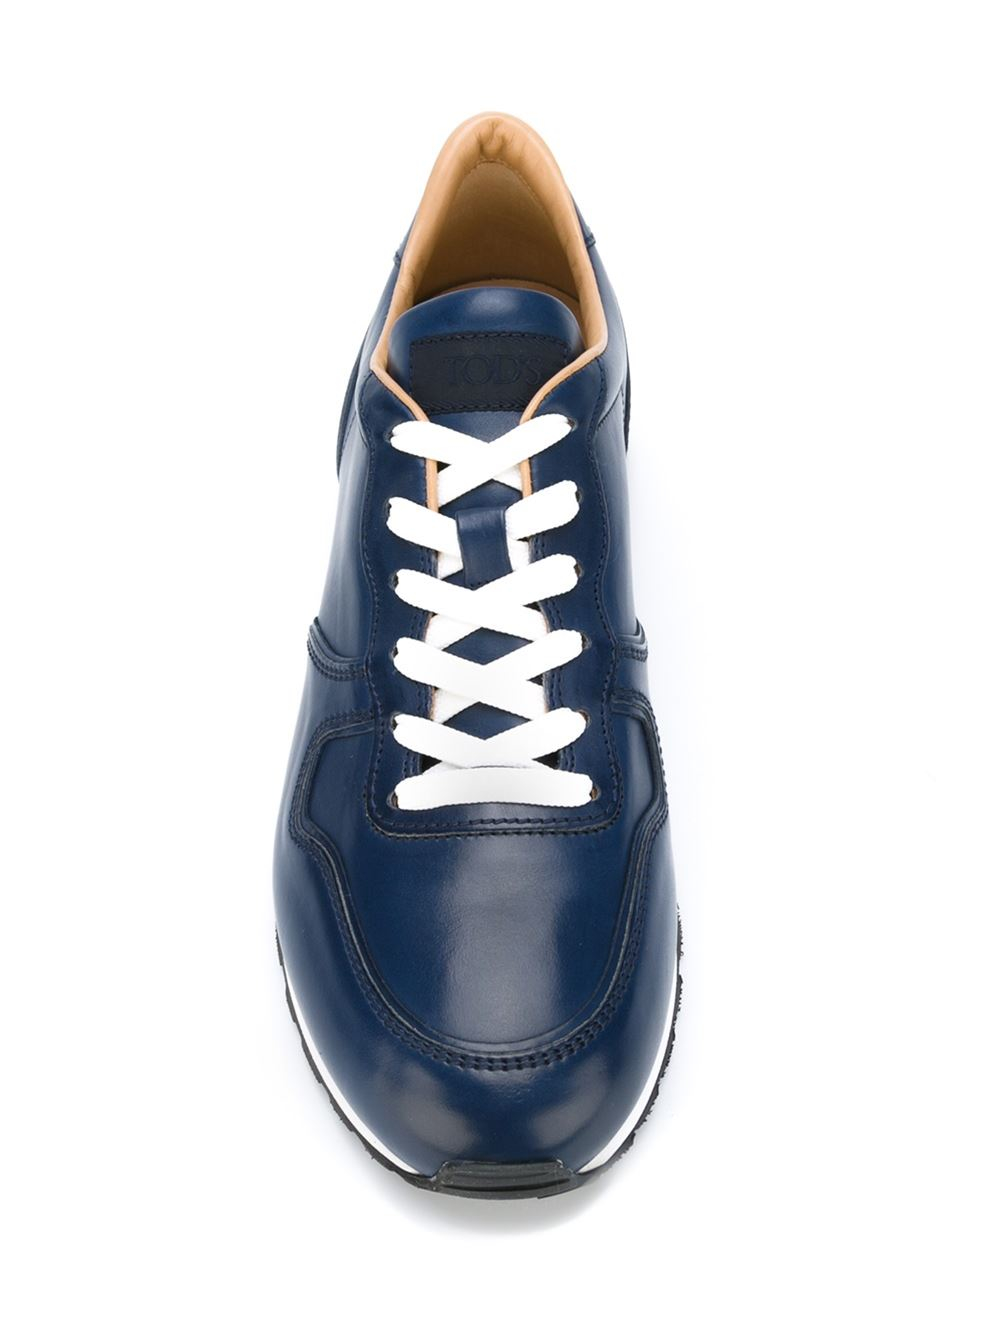 Tod's Leather Low-top Sneakers in Blue for Men - Lyst